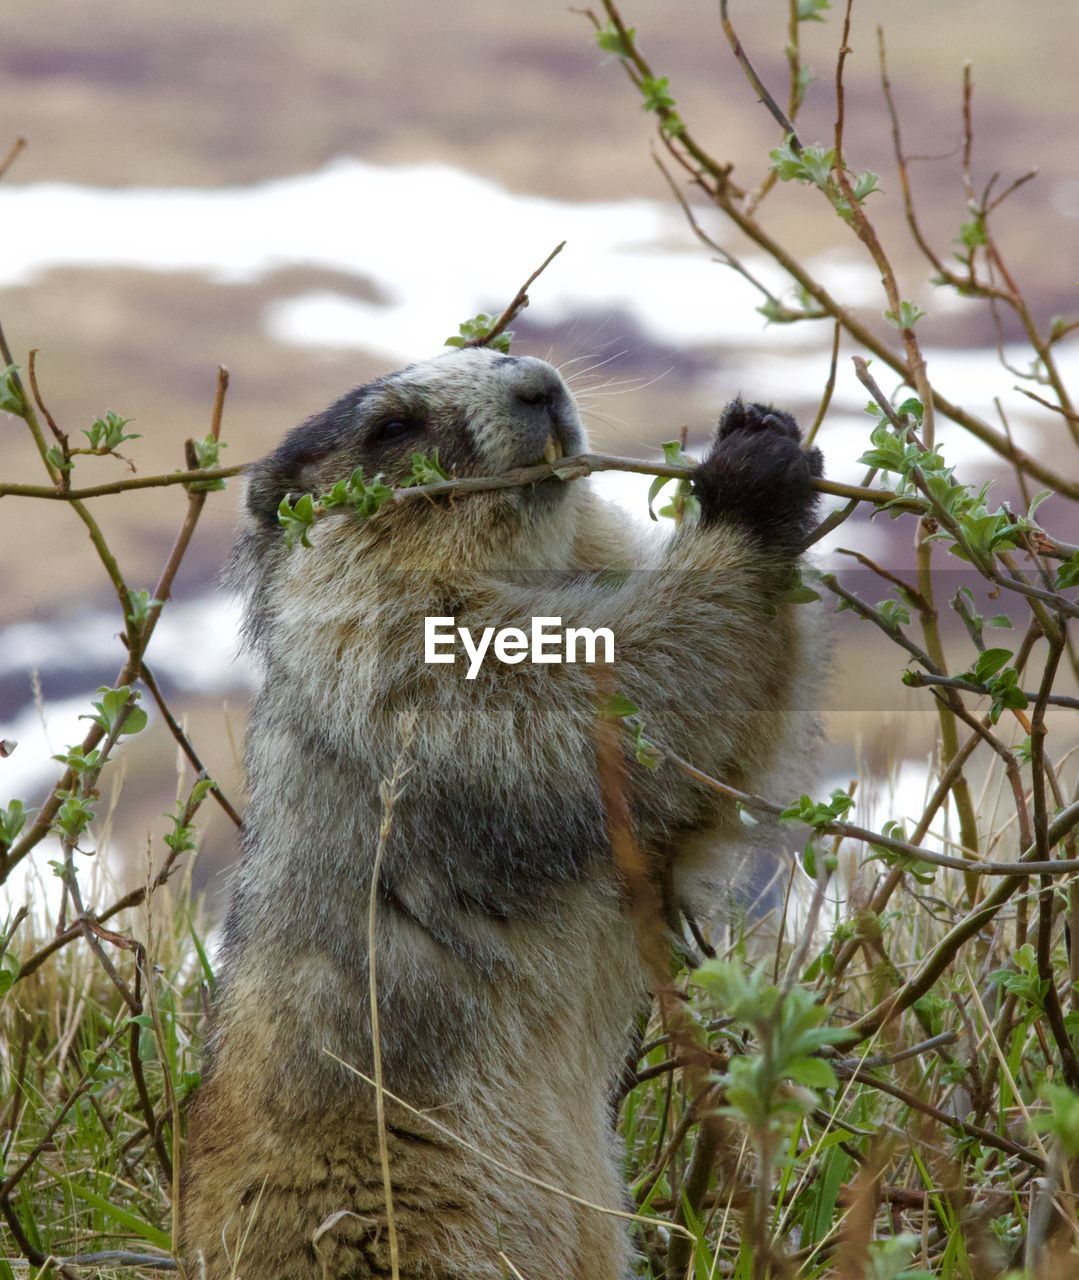 Close-up of hoary marmot eating a twig